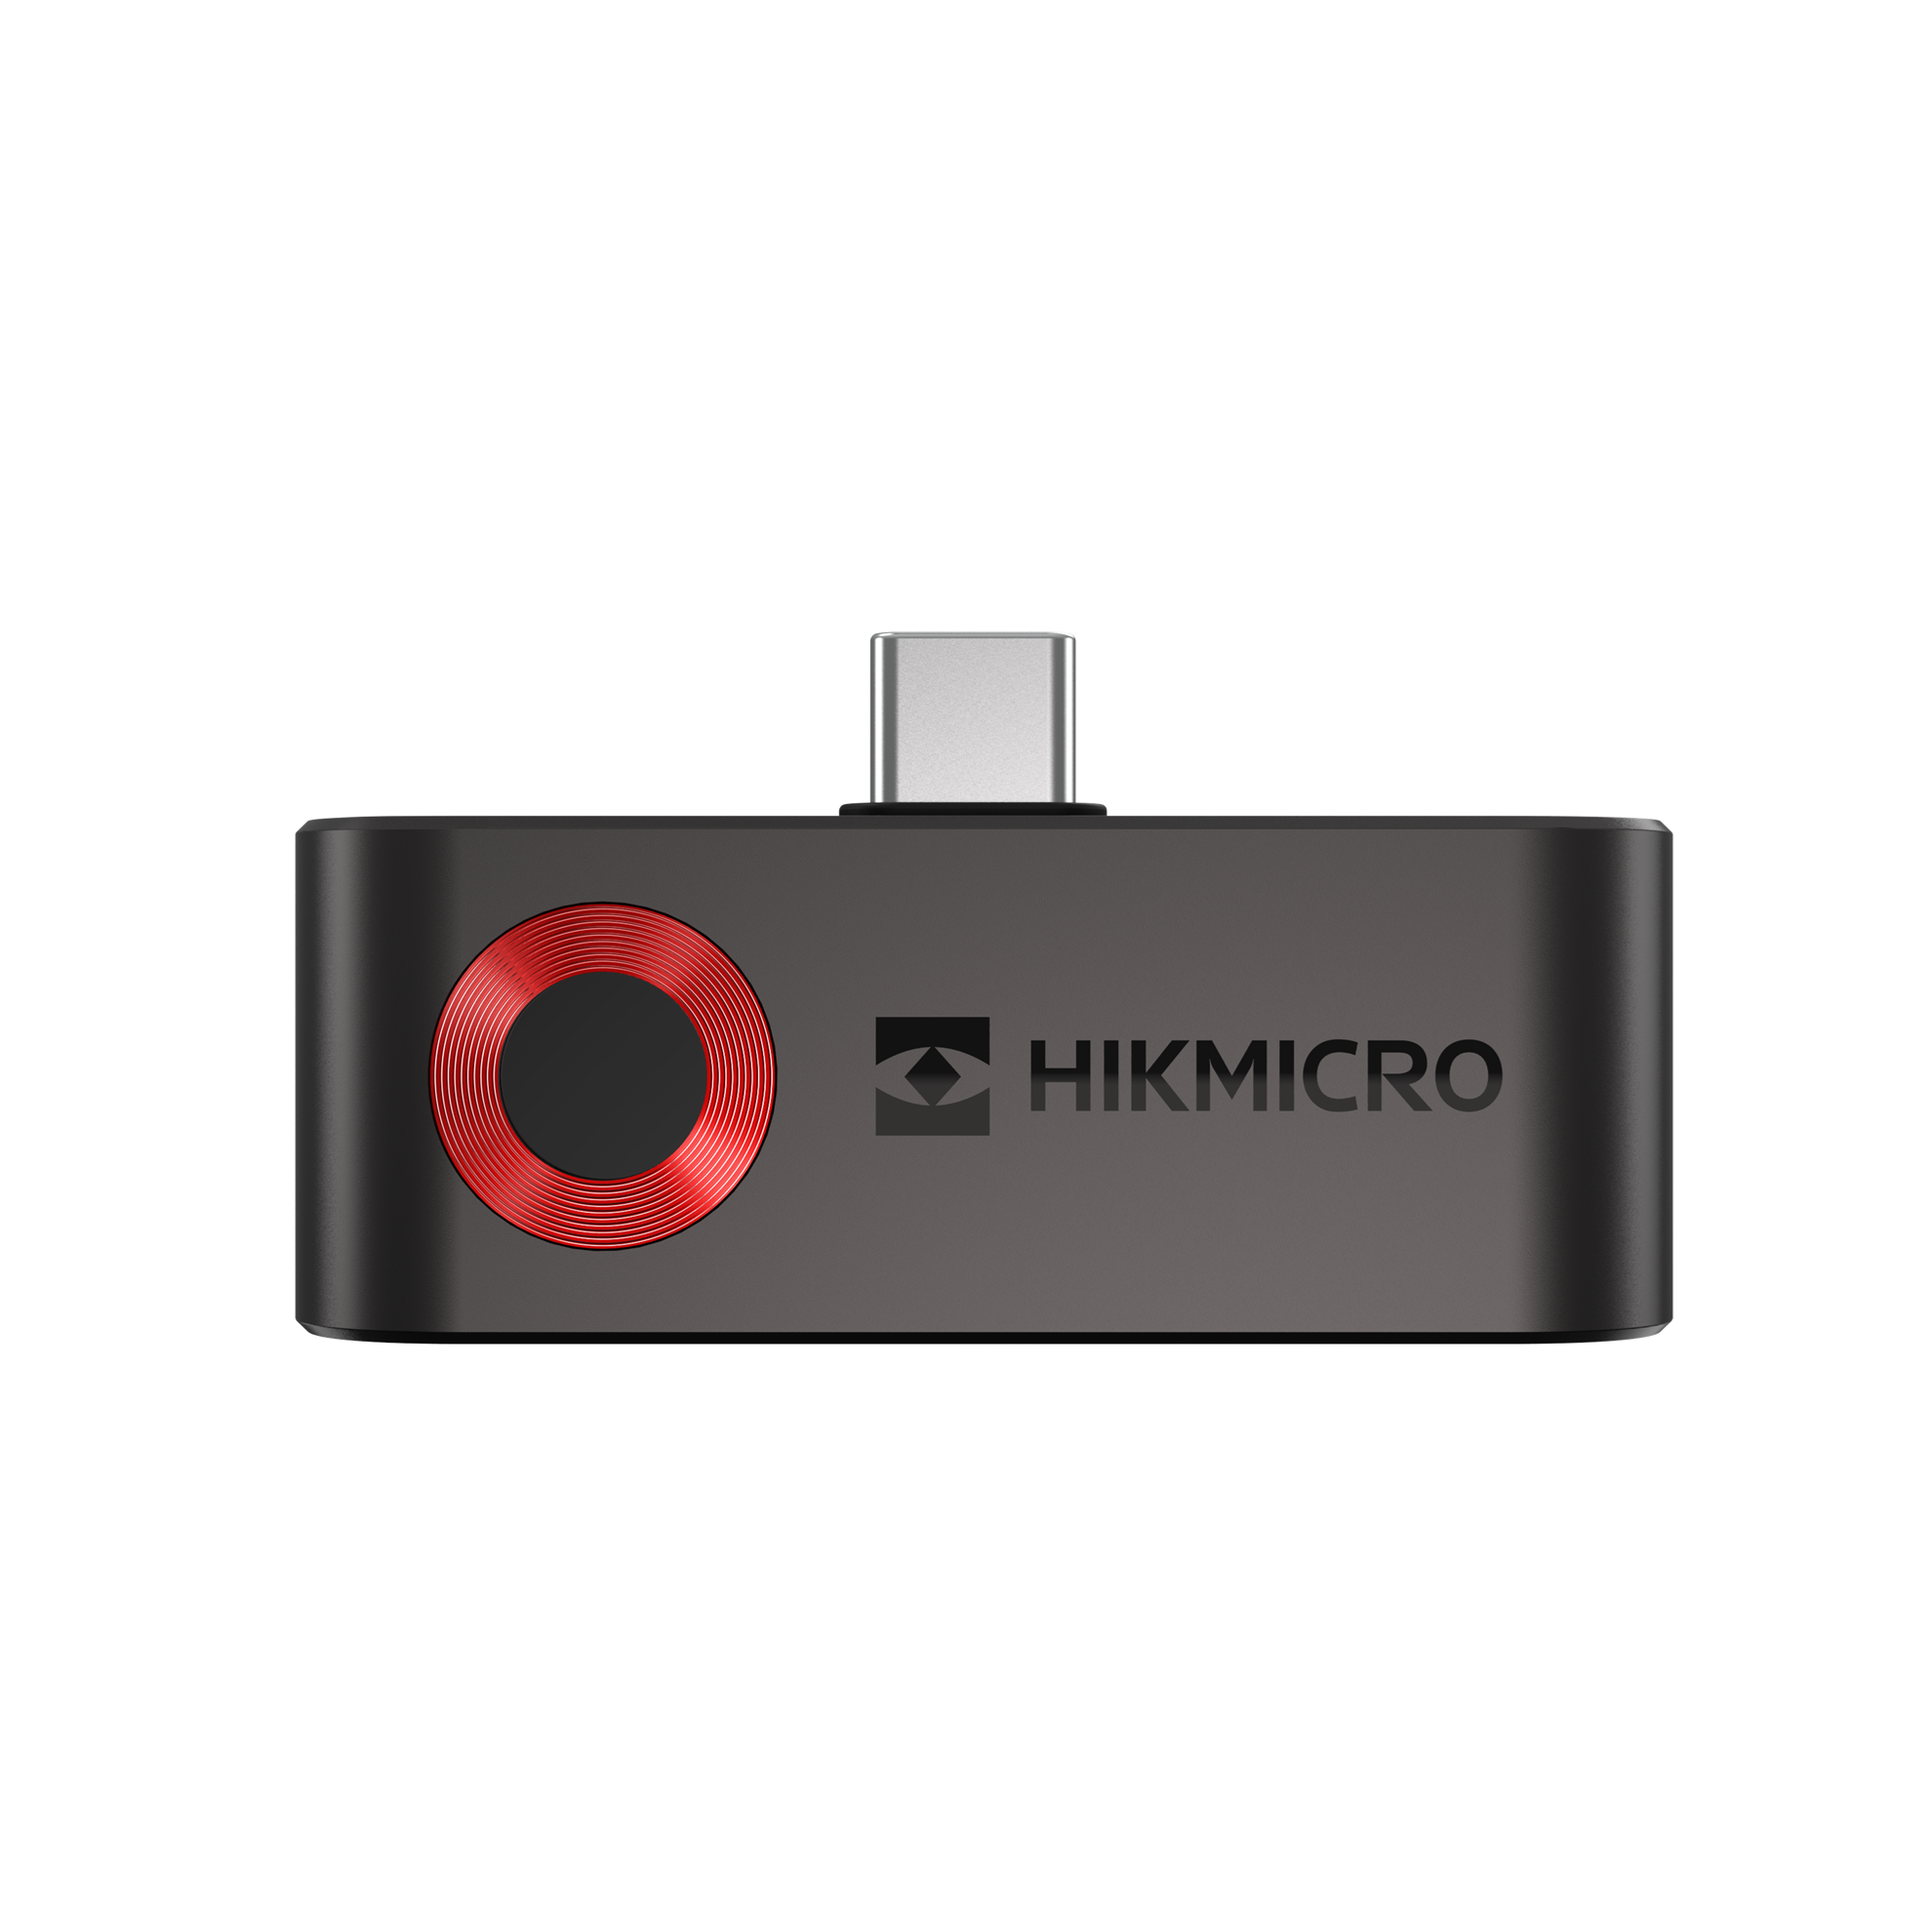 hikmicro mini1 smartphone thermal imaging adapter. usb type-c tech supply shed